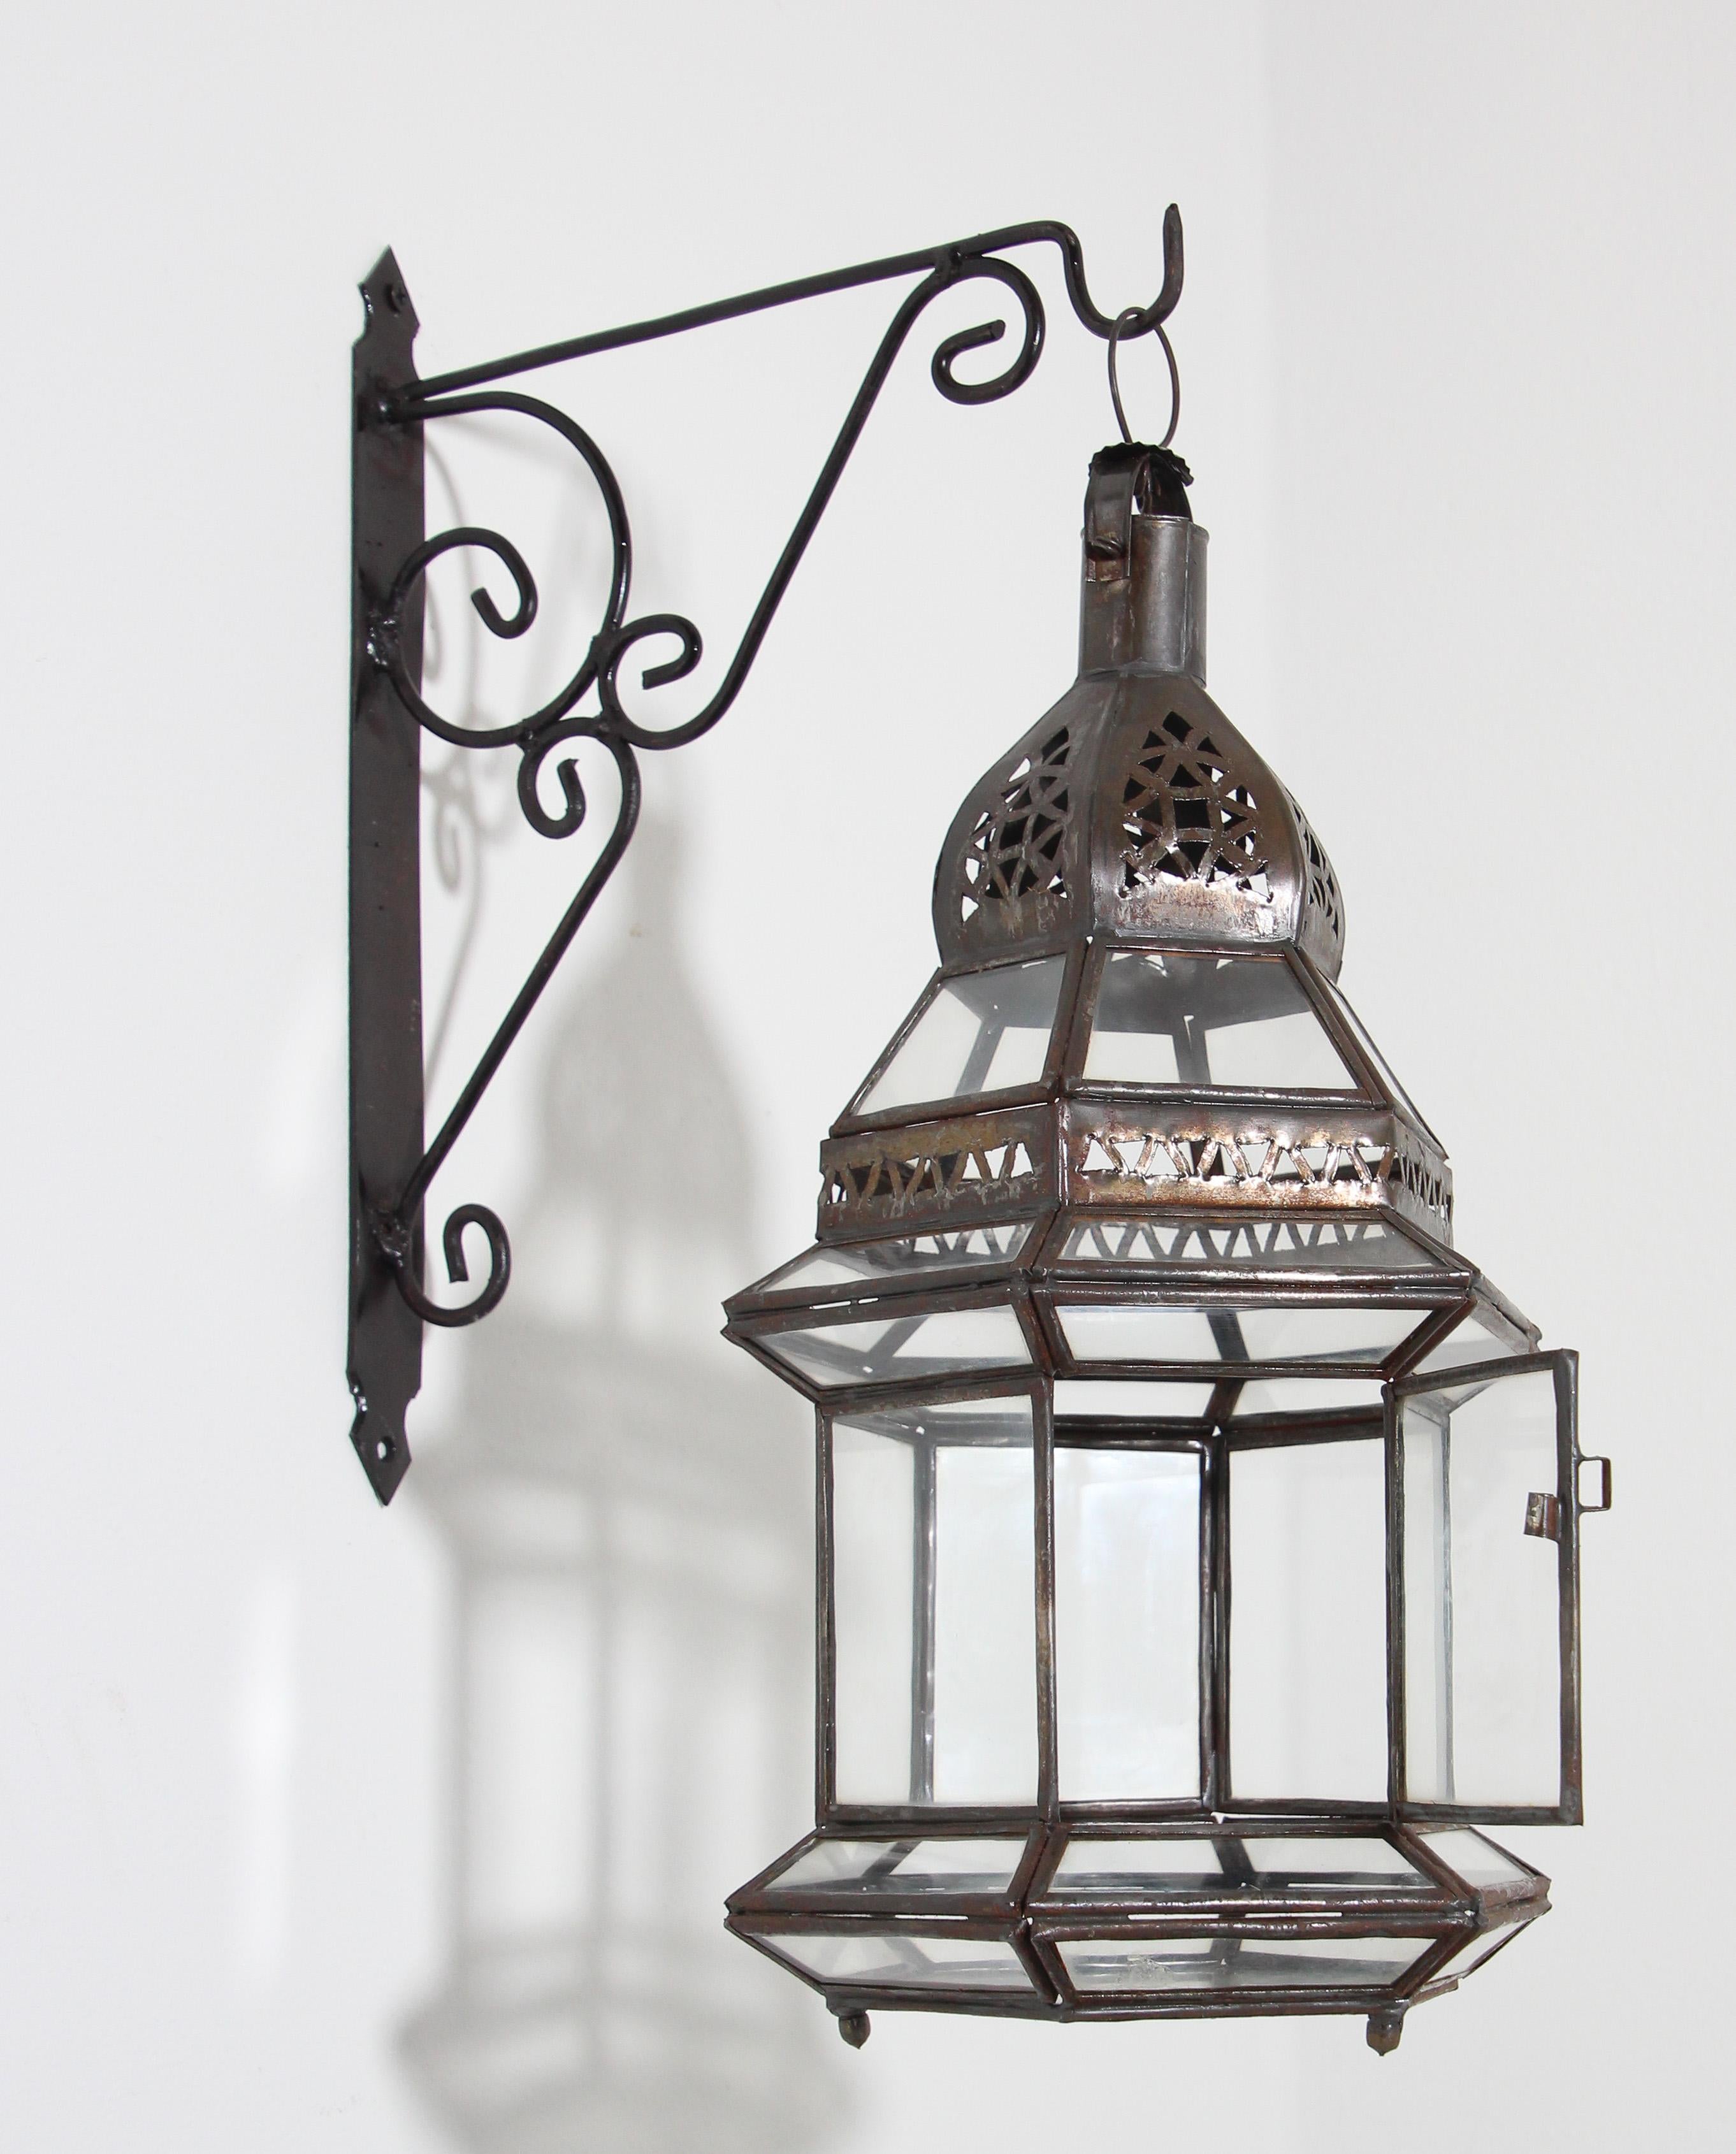 Hand-Crafted Handcrafted Moroccan Hanging Metal and Glass Lantern